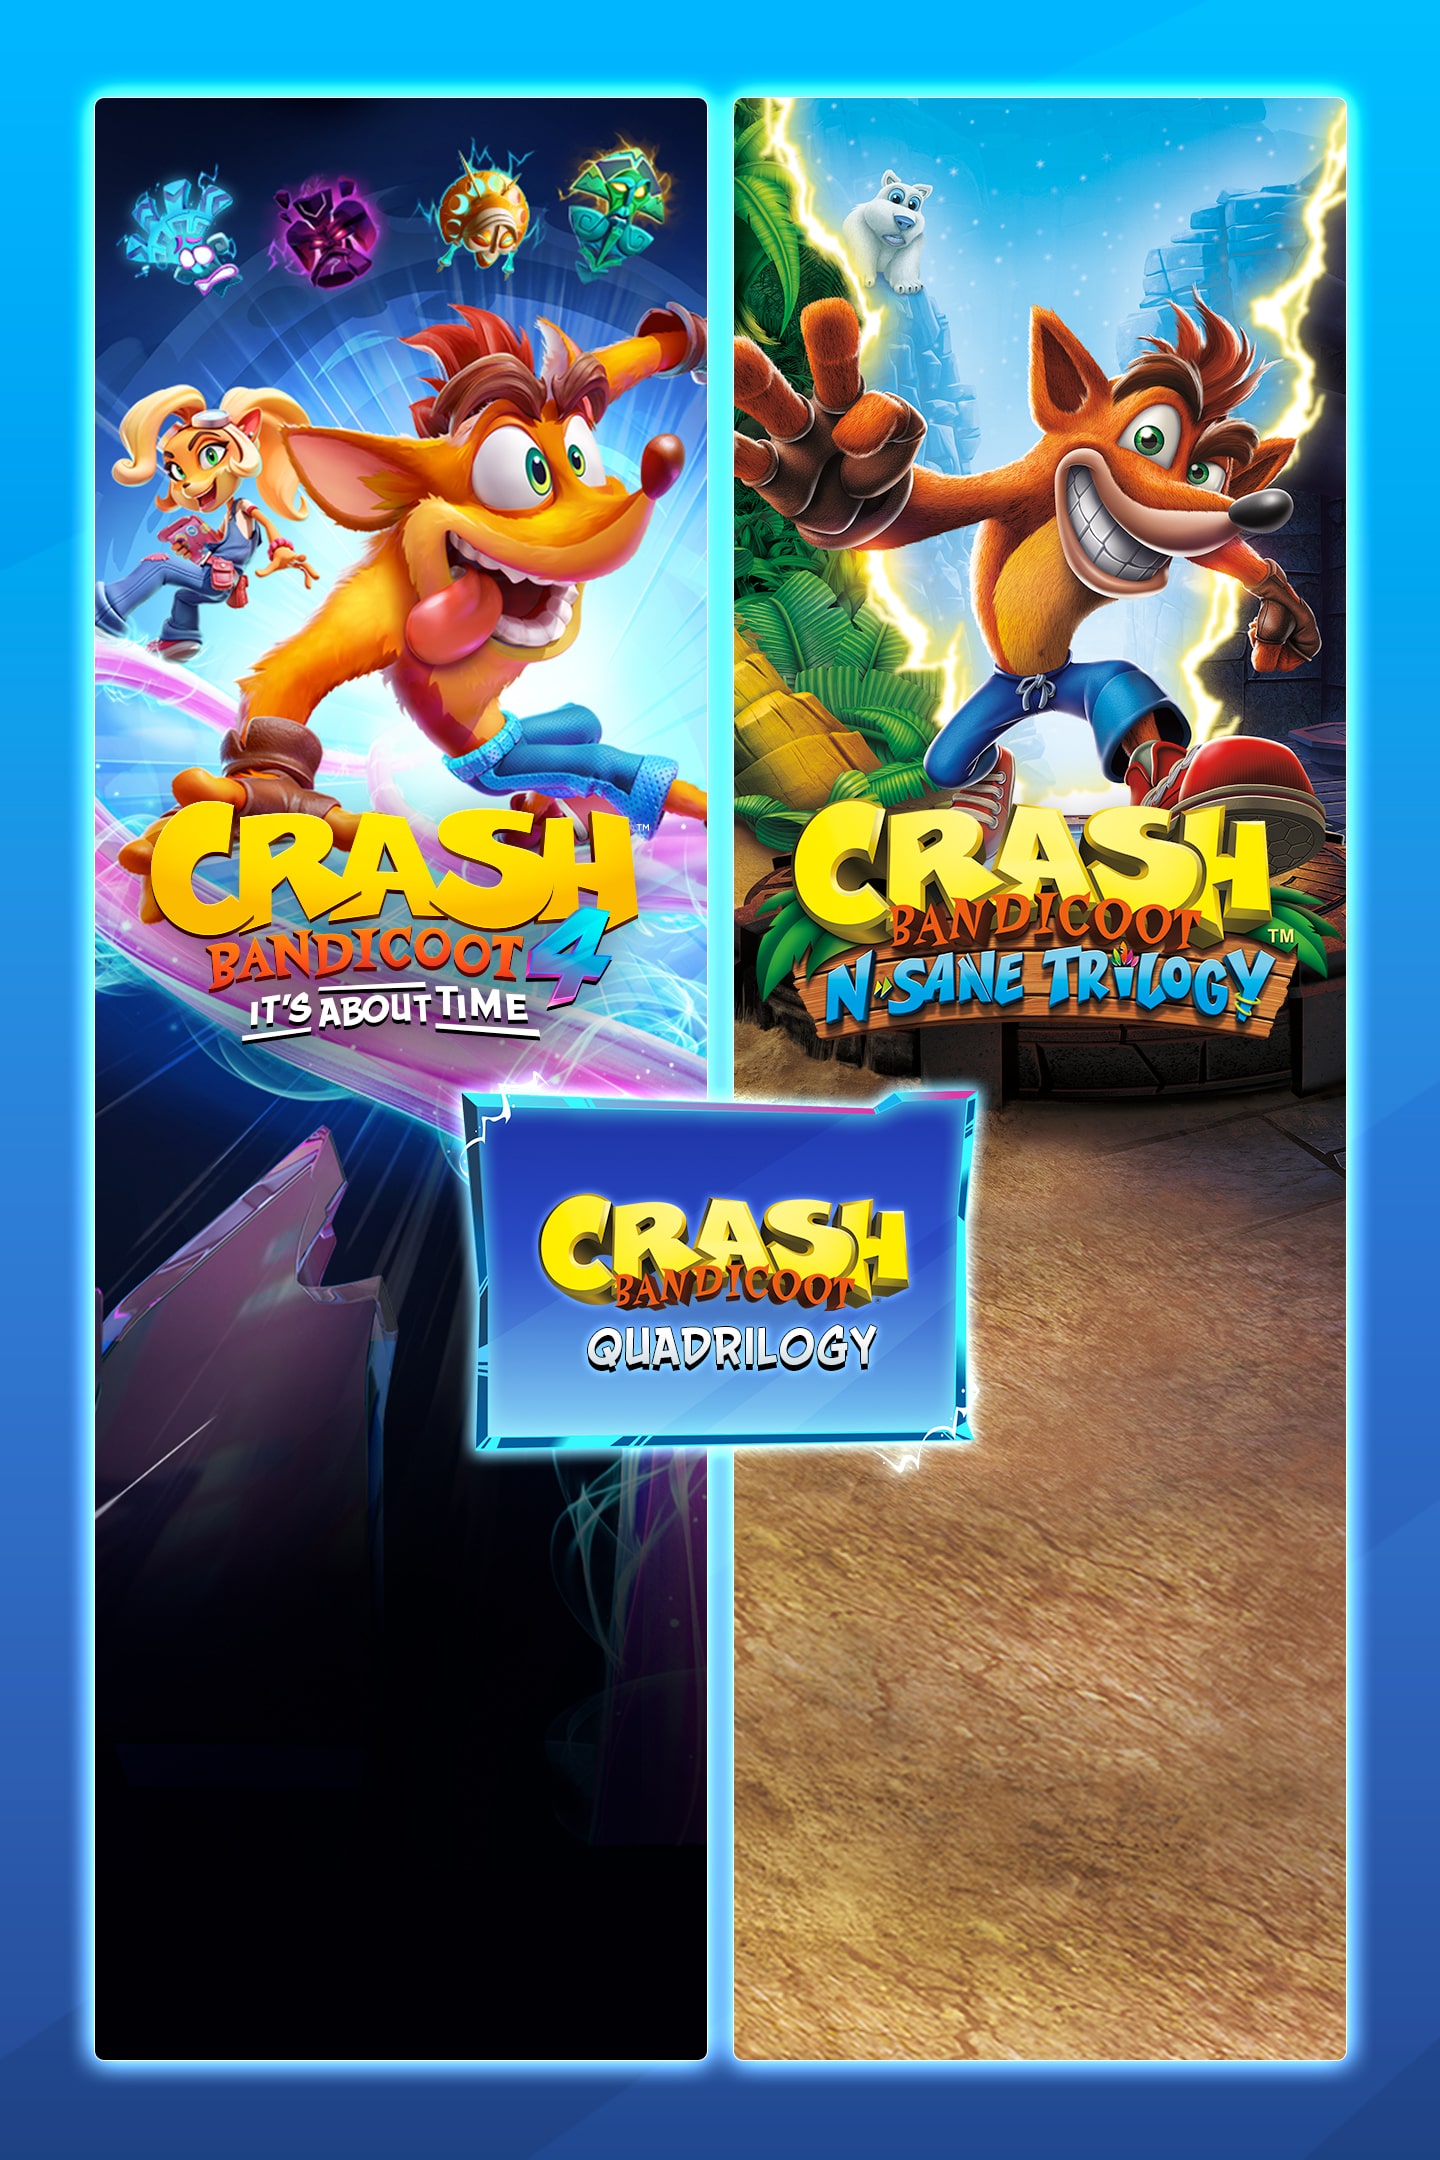 Crash Bandicoot 4: Its About Time (PS5) cheap - Price of $12.53